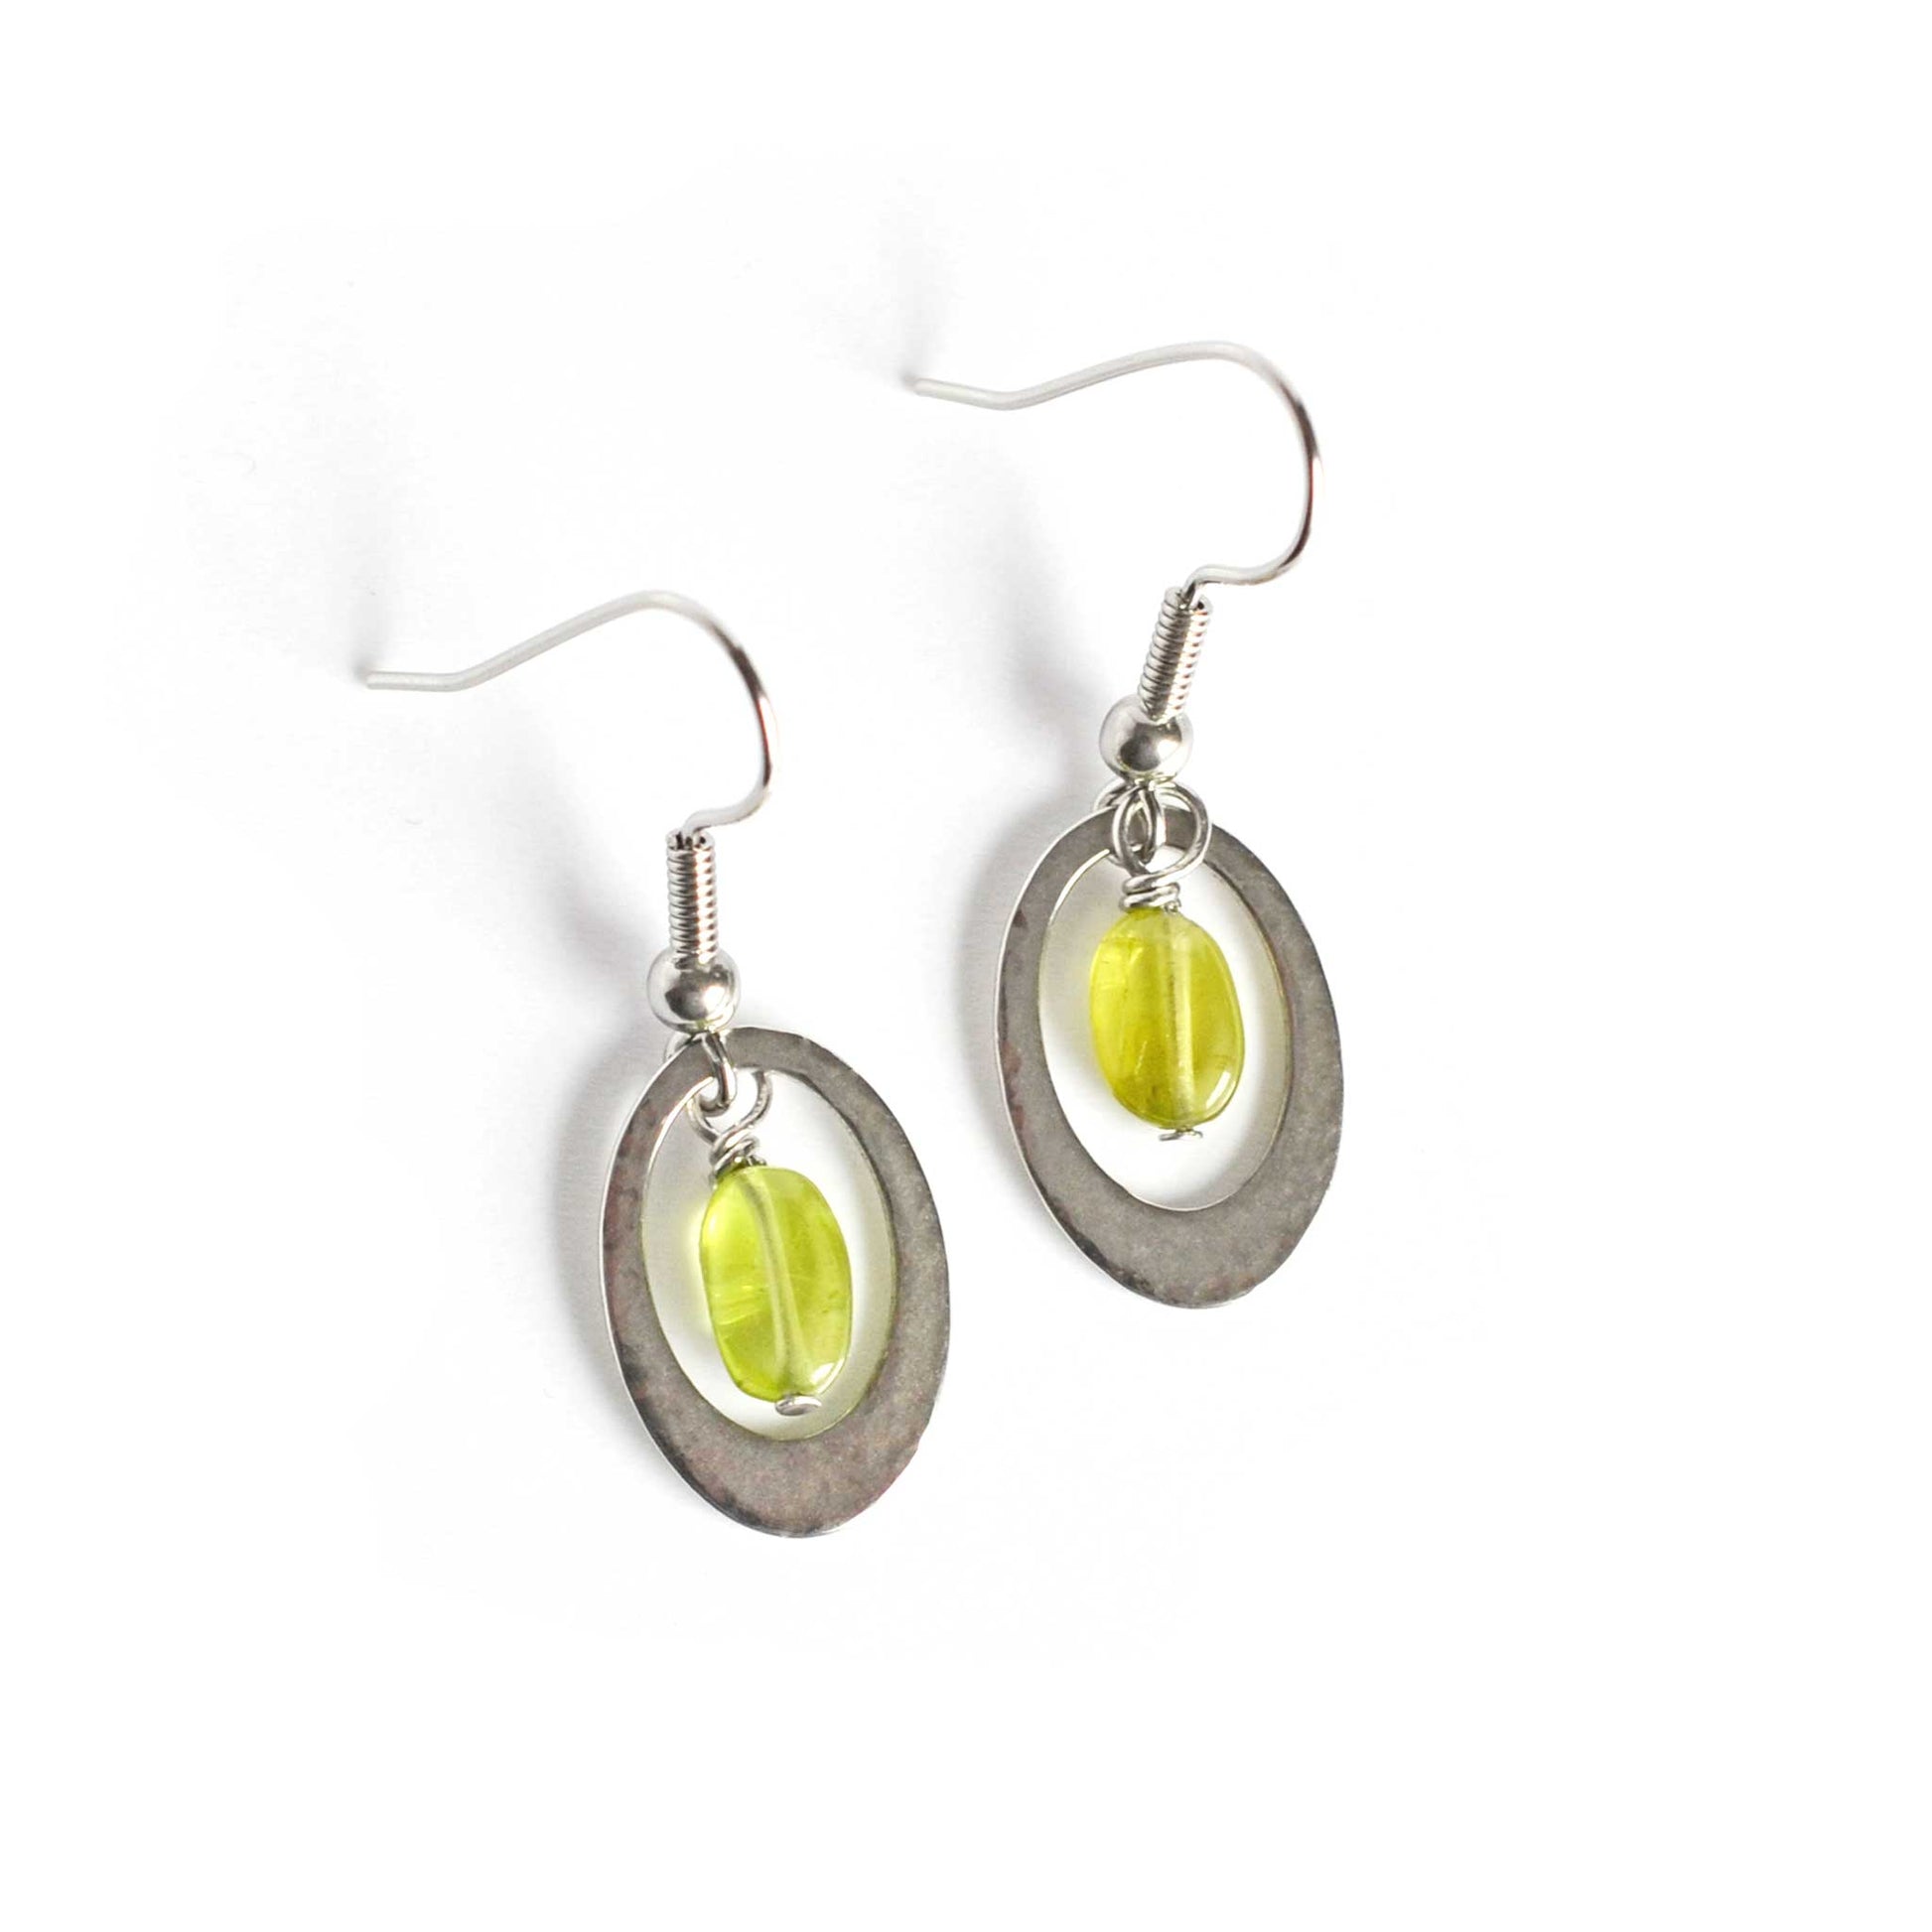 Pair of oval Peridot earrings with hypoallergenic surgical steel hooks on white background.